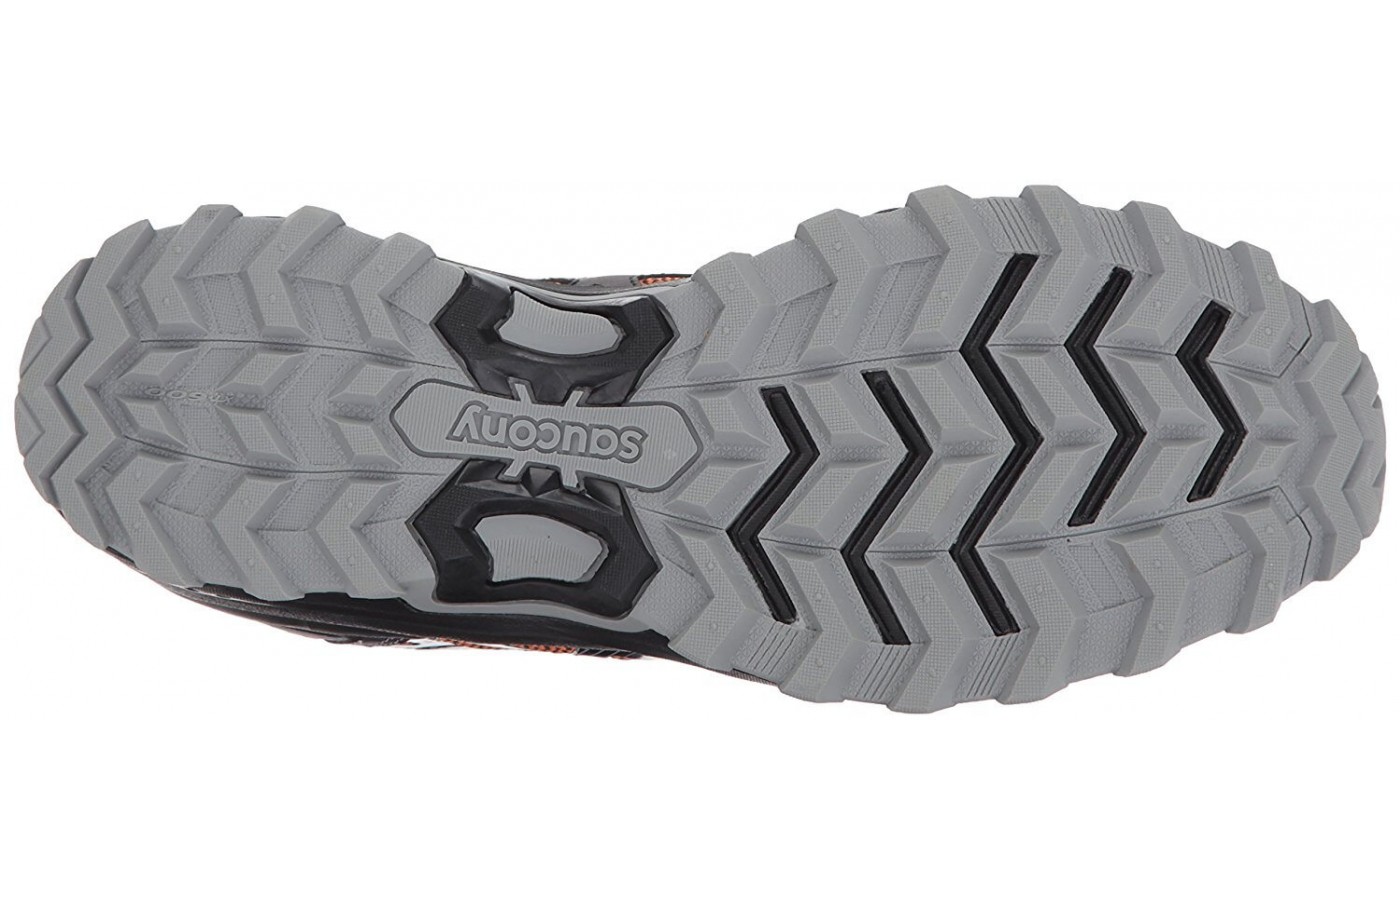 The Saucony Excursion TR11 features XT-600 rubber in its outsole